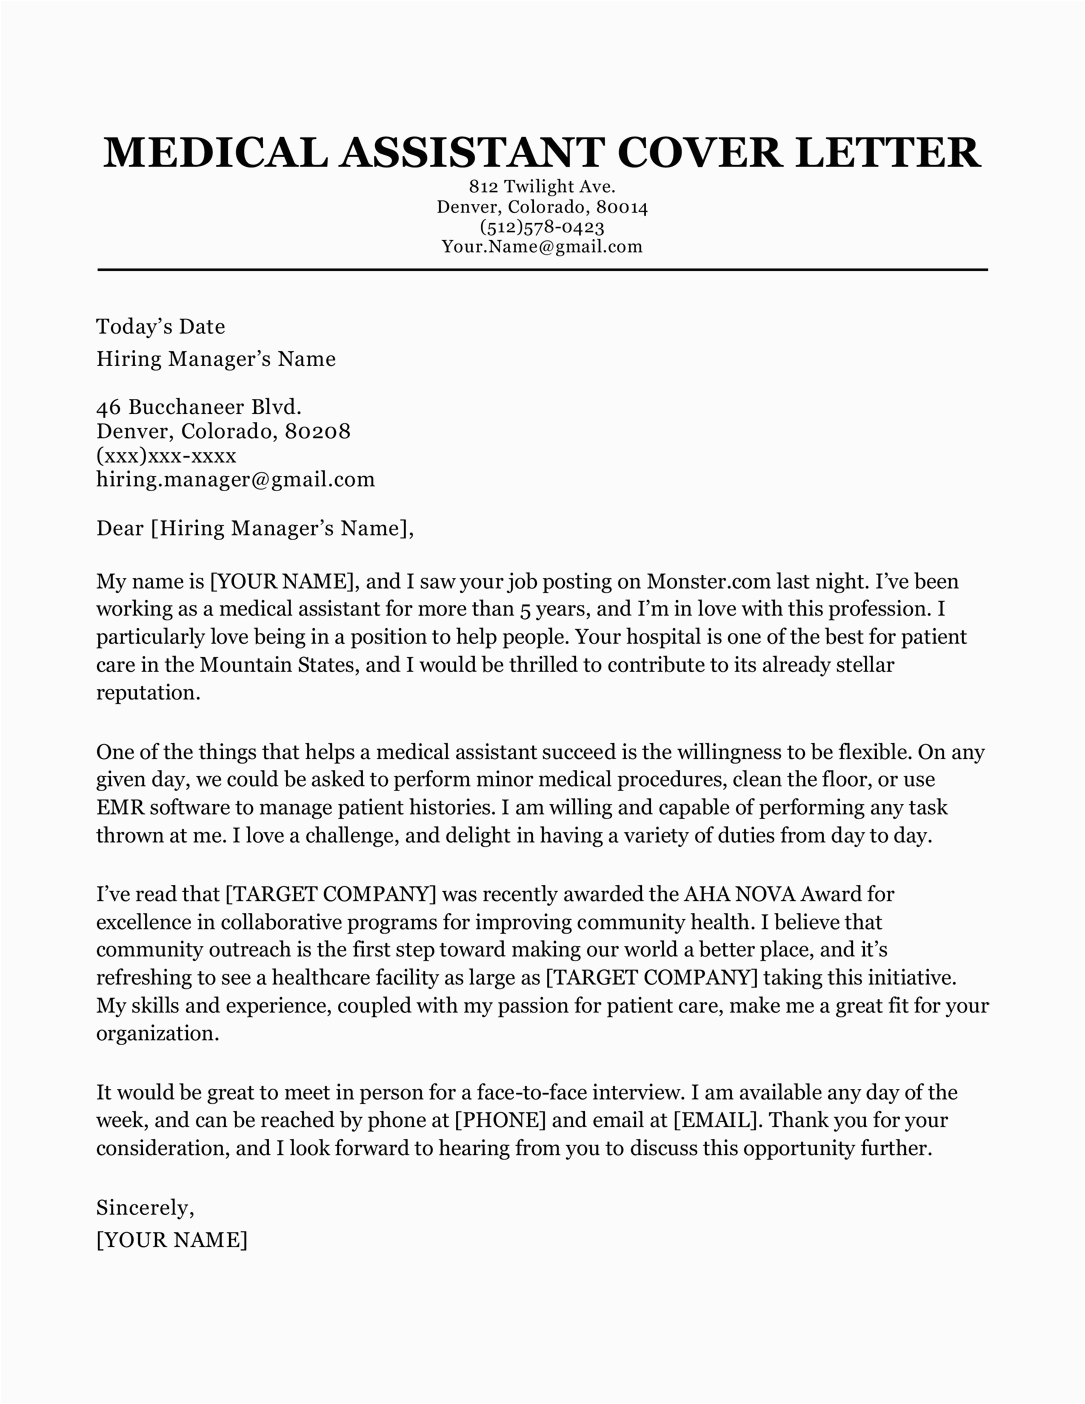 Sample Cover Letter for Physician assistant Resume Medical assistant Cover Letter Sample